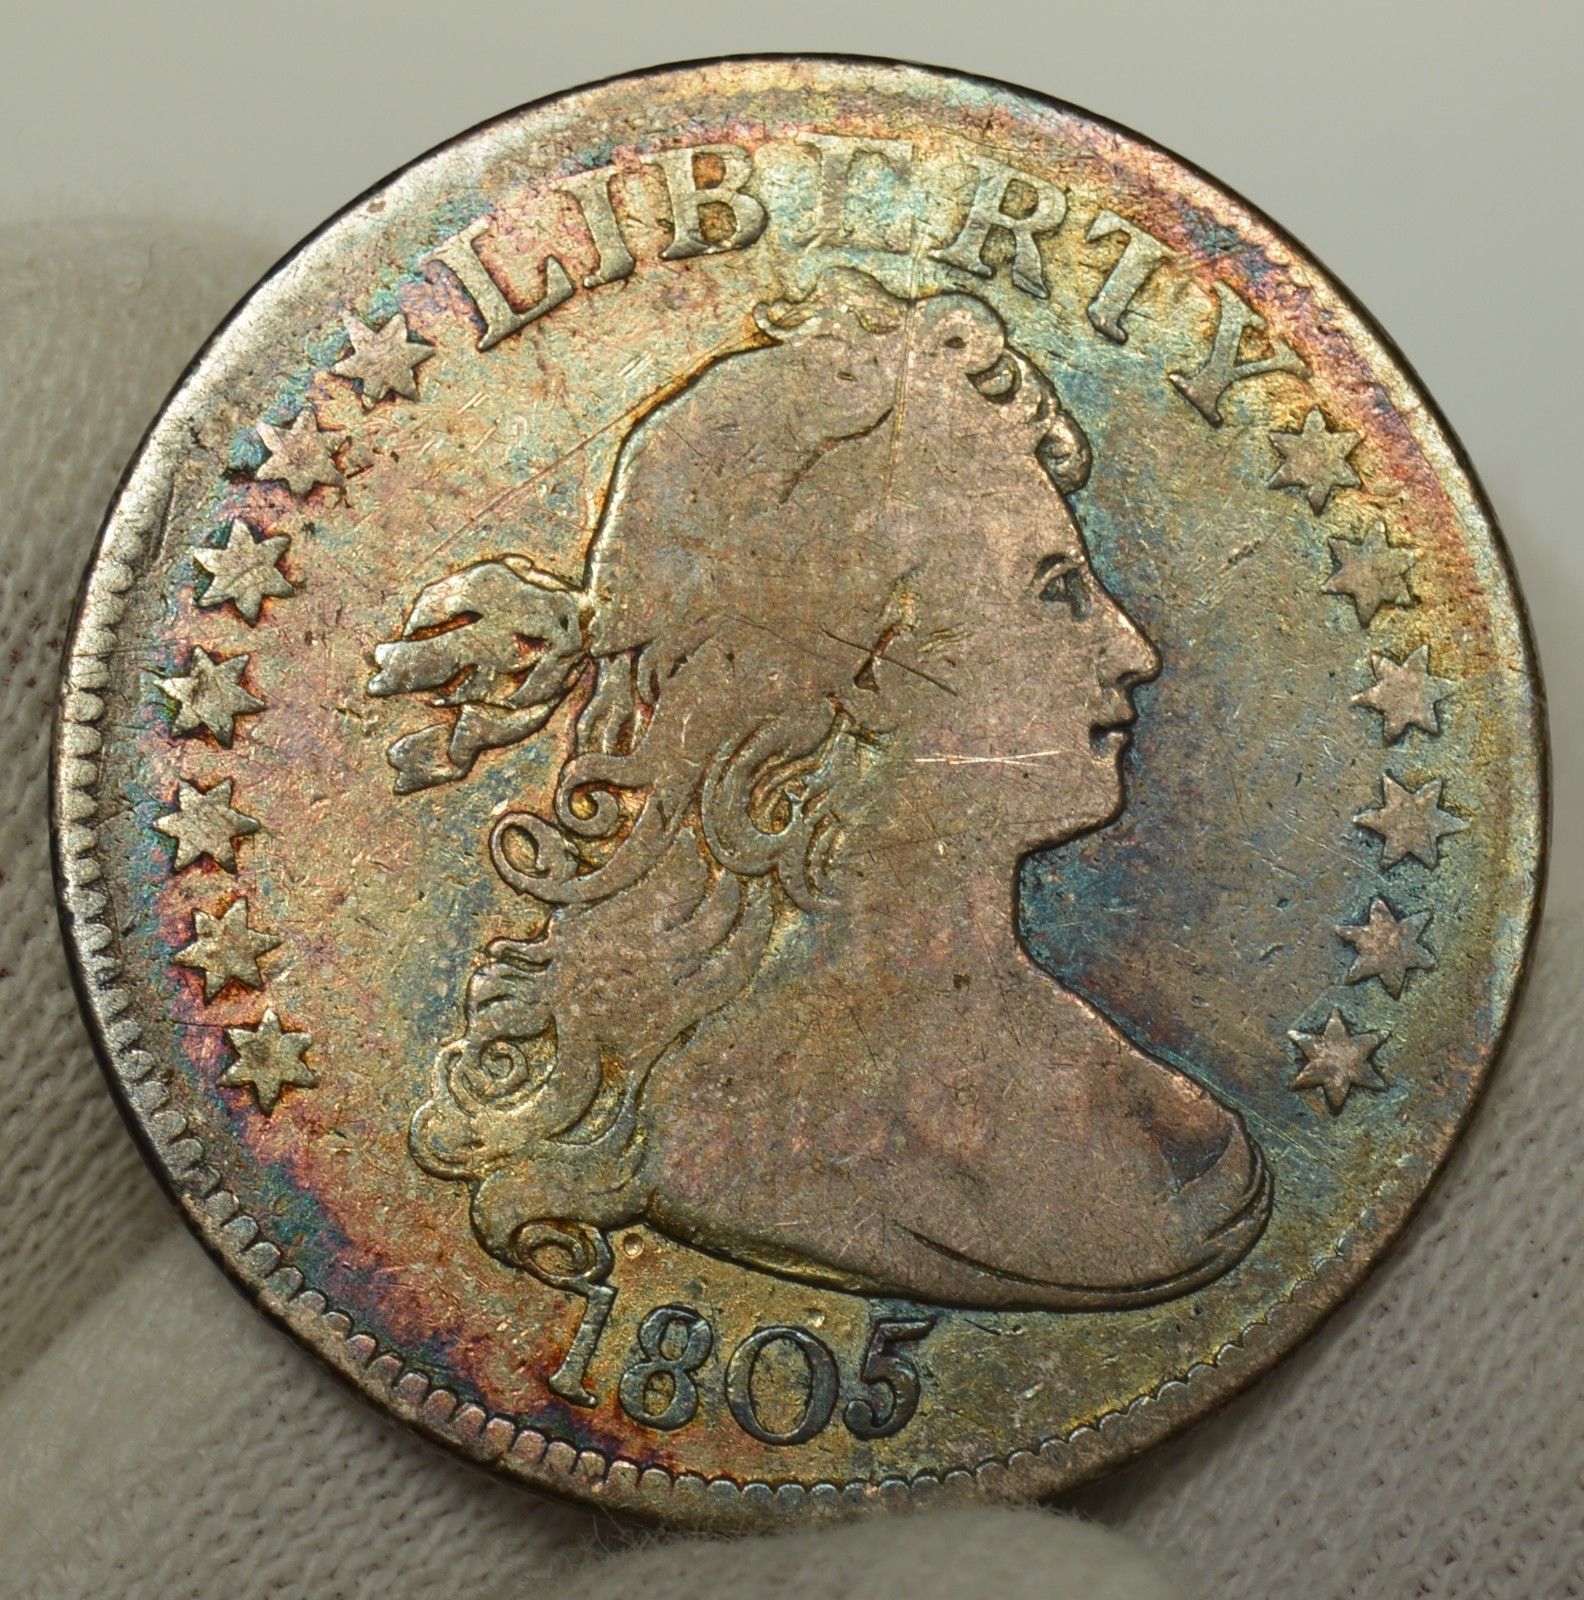 Quarters - Sell Coins Near Me